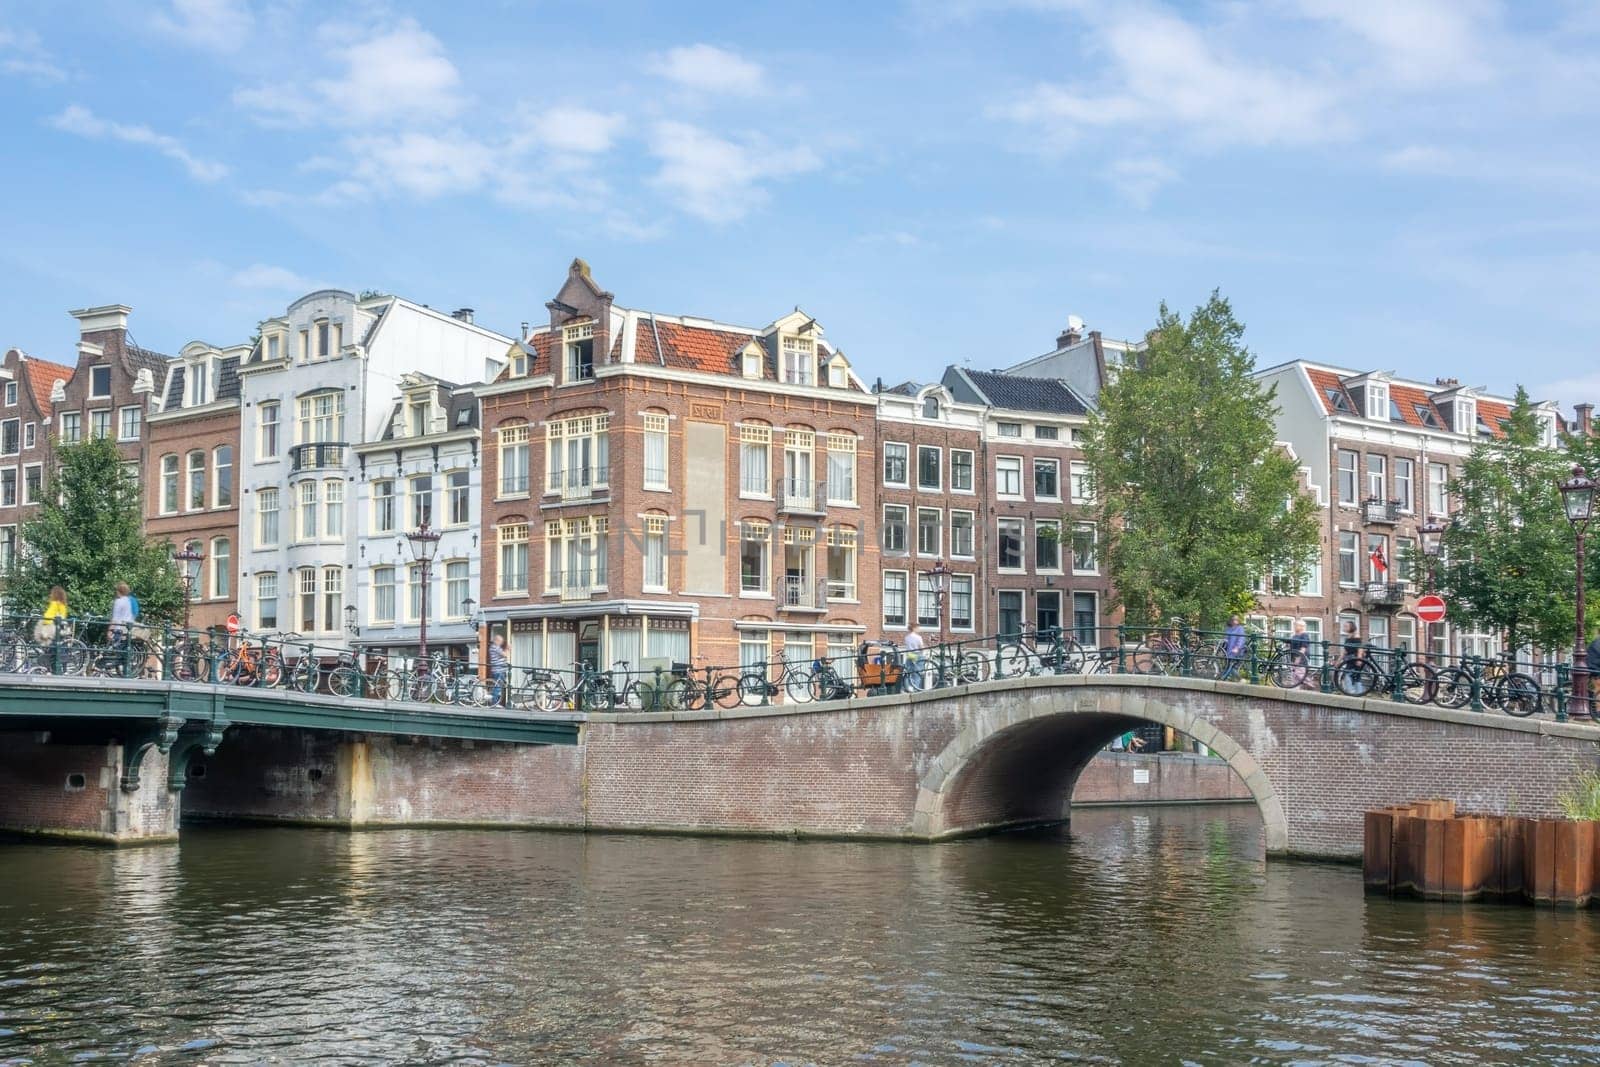 Confluence of Canals in Amsterdam and Stone Bridges by Ruckzack